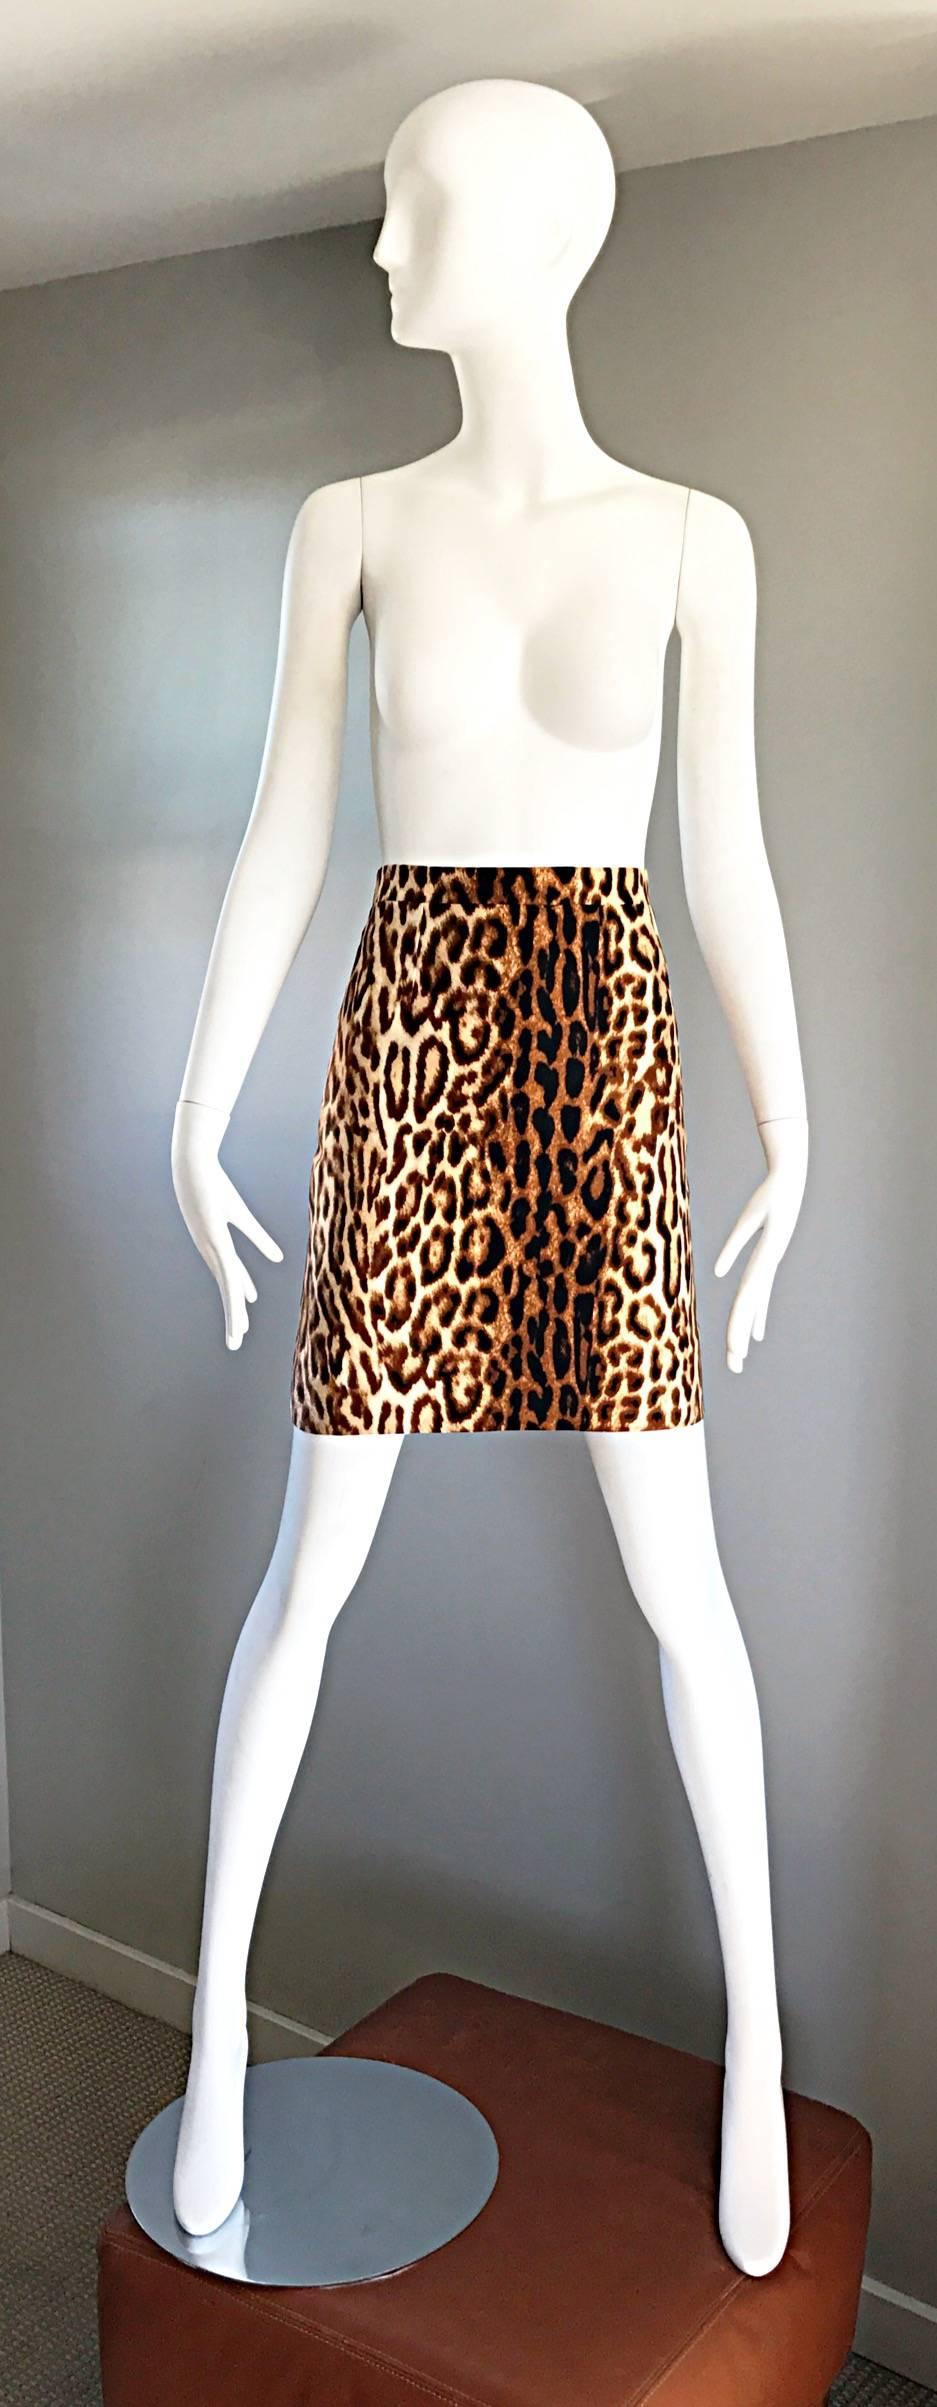 Sexy vintage CELINE by MICHAEL KORS leopard / cheetah animal print high waisted mini skirt! Chic and timeless print and style, with just the right amount of sex appeal. Fully lined. Hidden zipper up the back with button closure. Great for day or